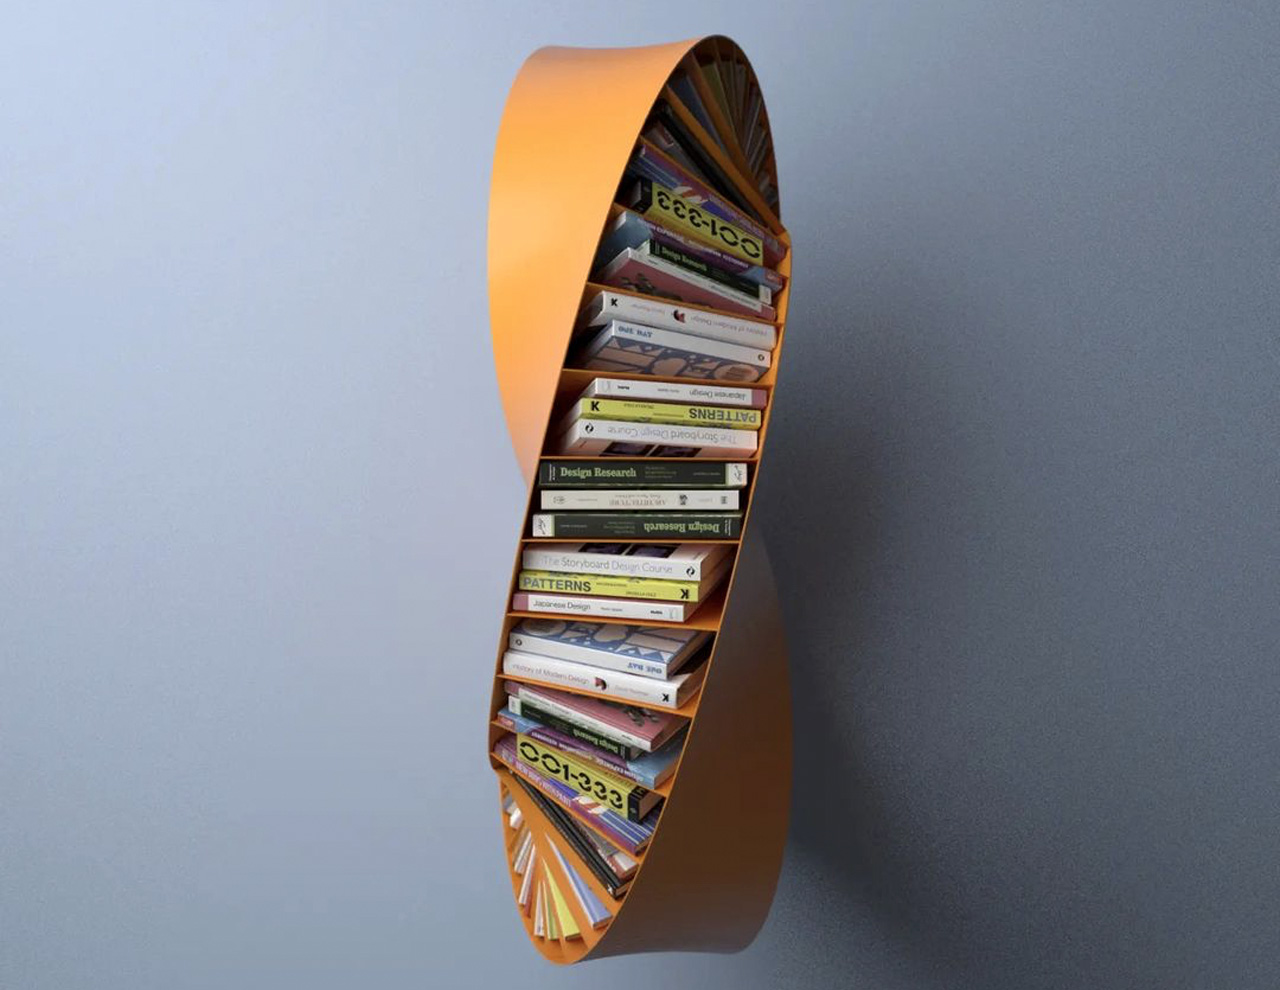 This twisting sculptural furniture design provides a new identity to conventional bookshelves